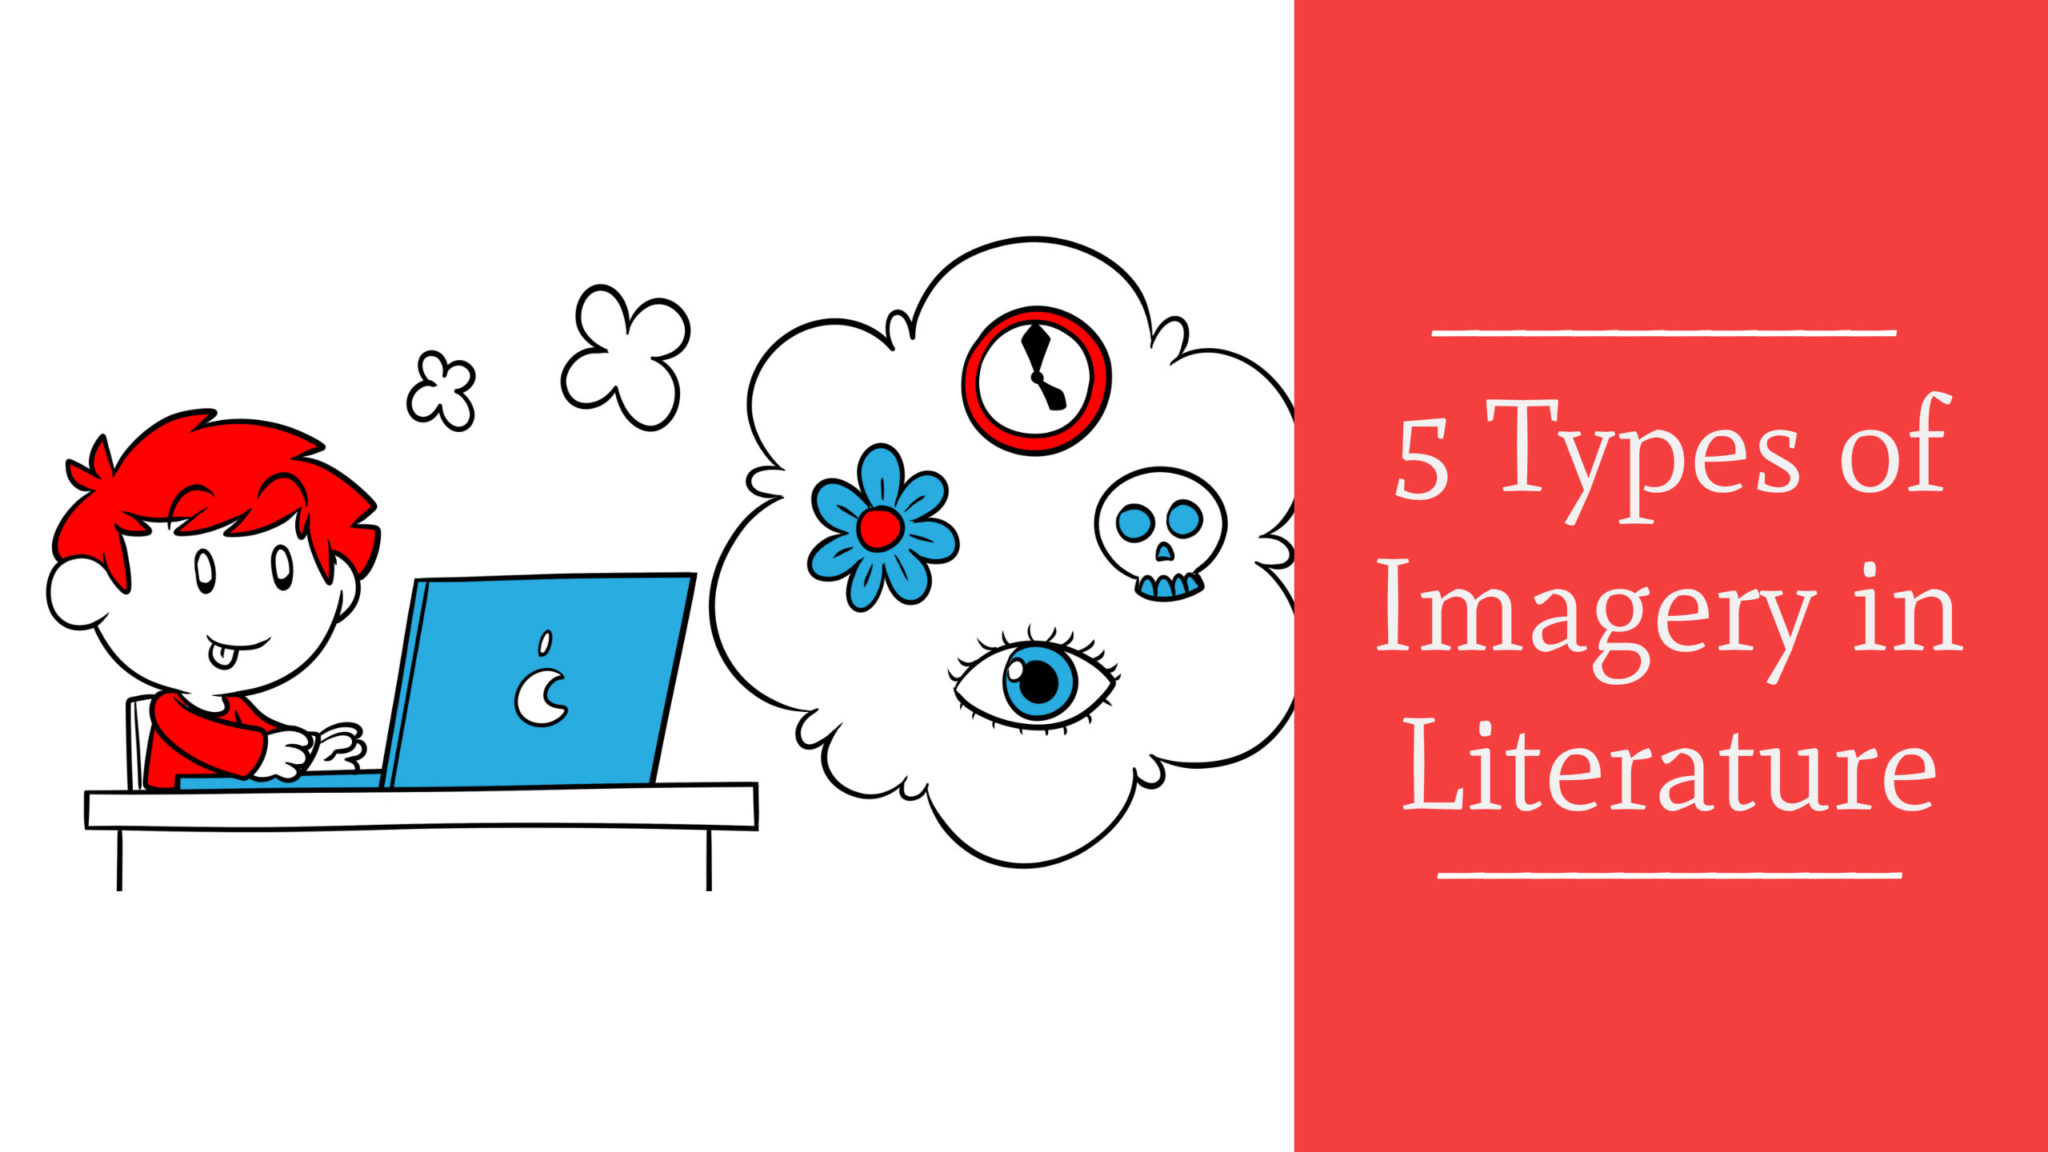 literature types of imagery